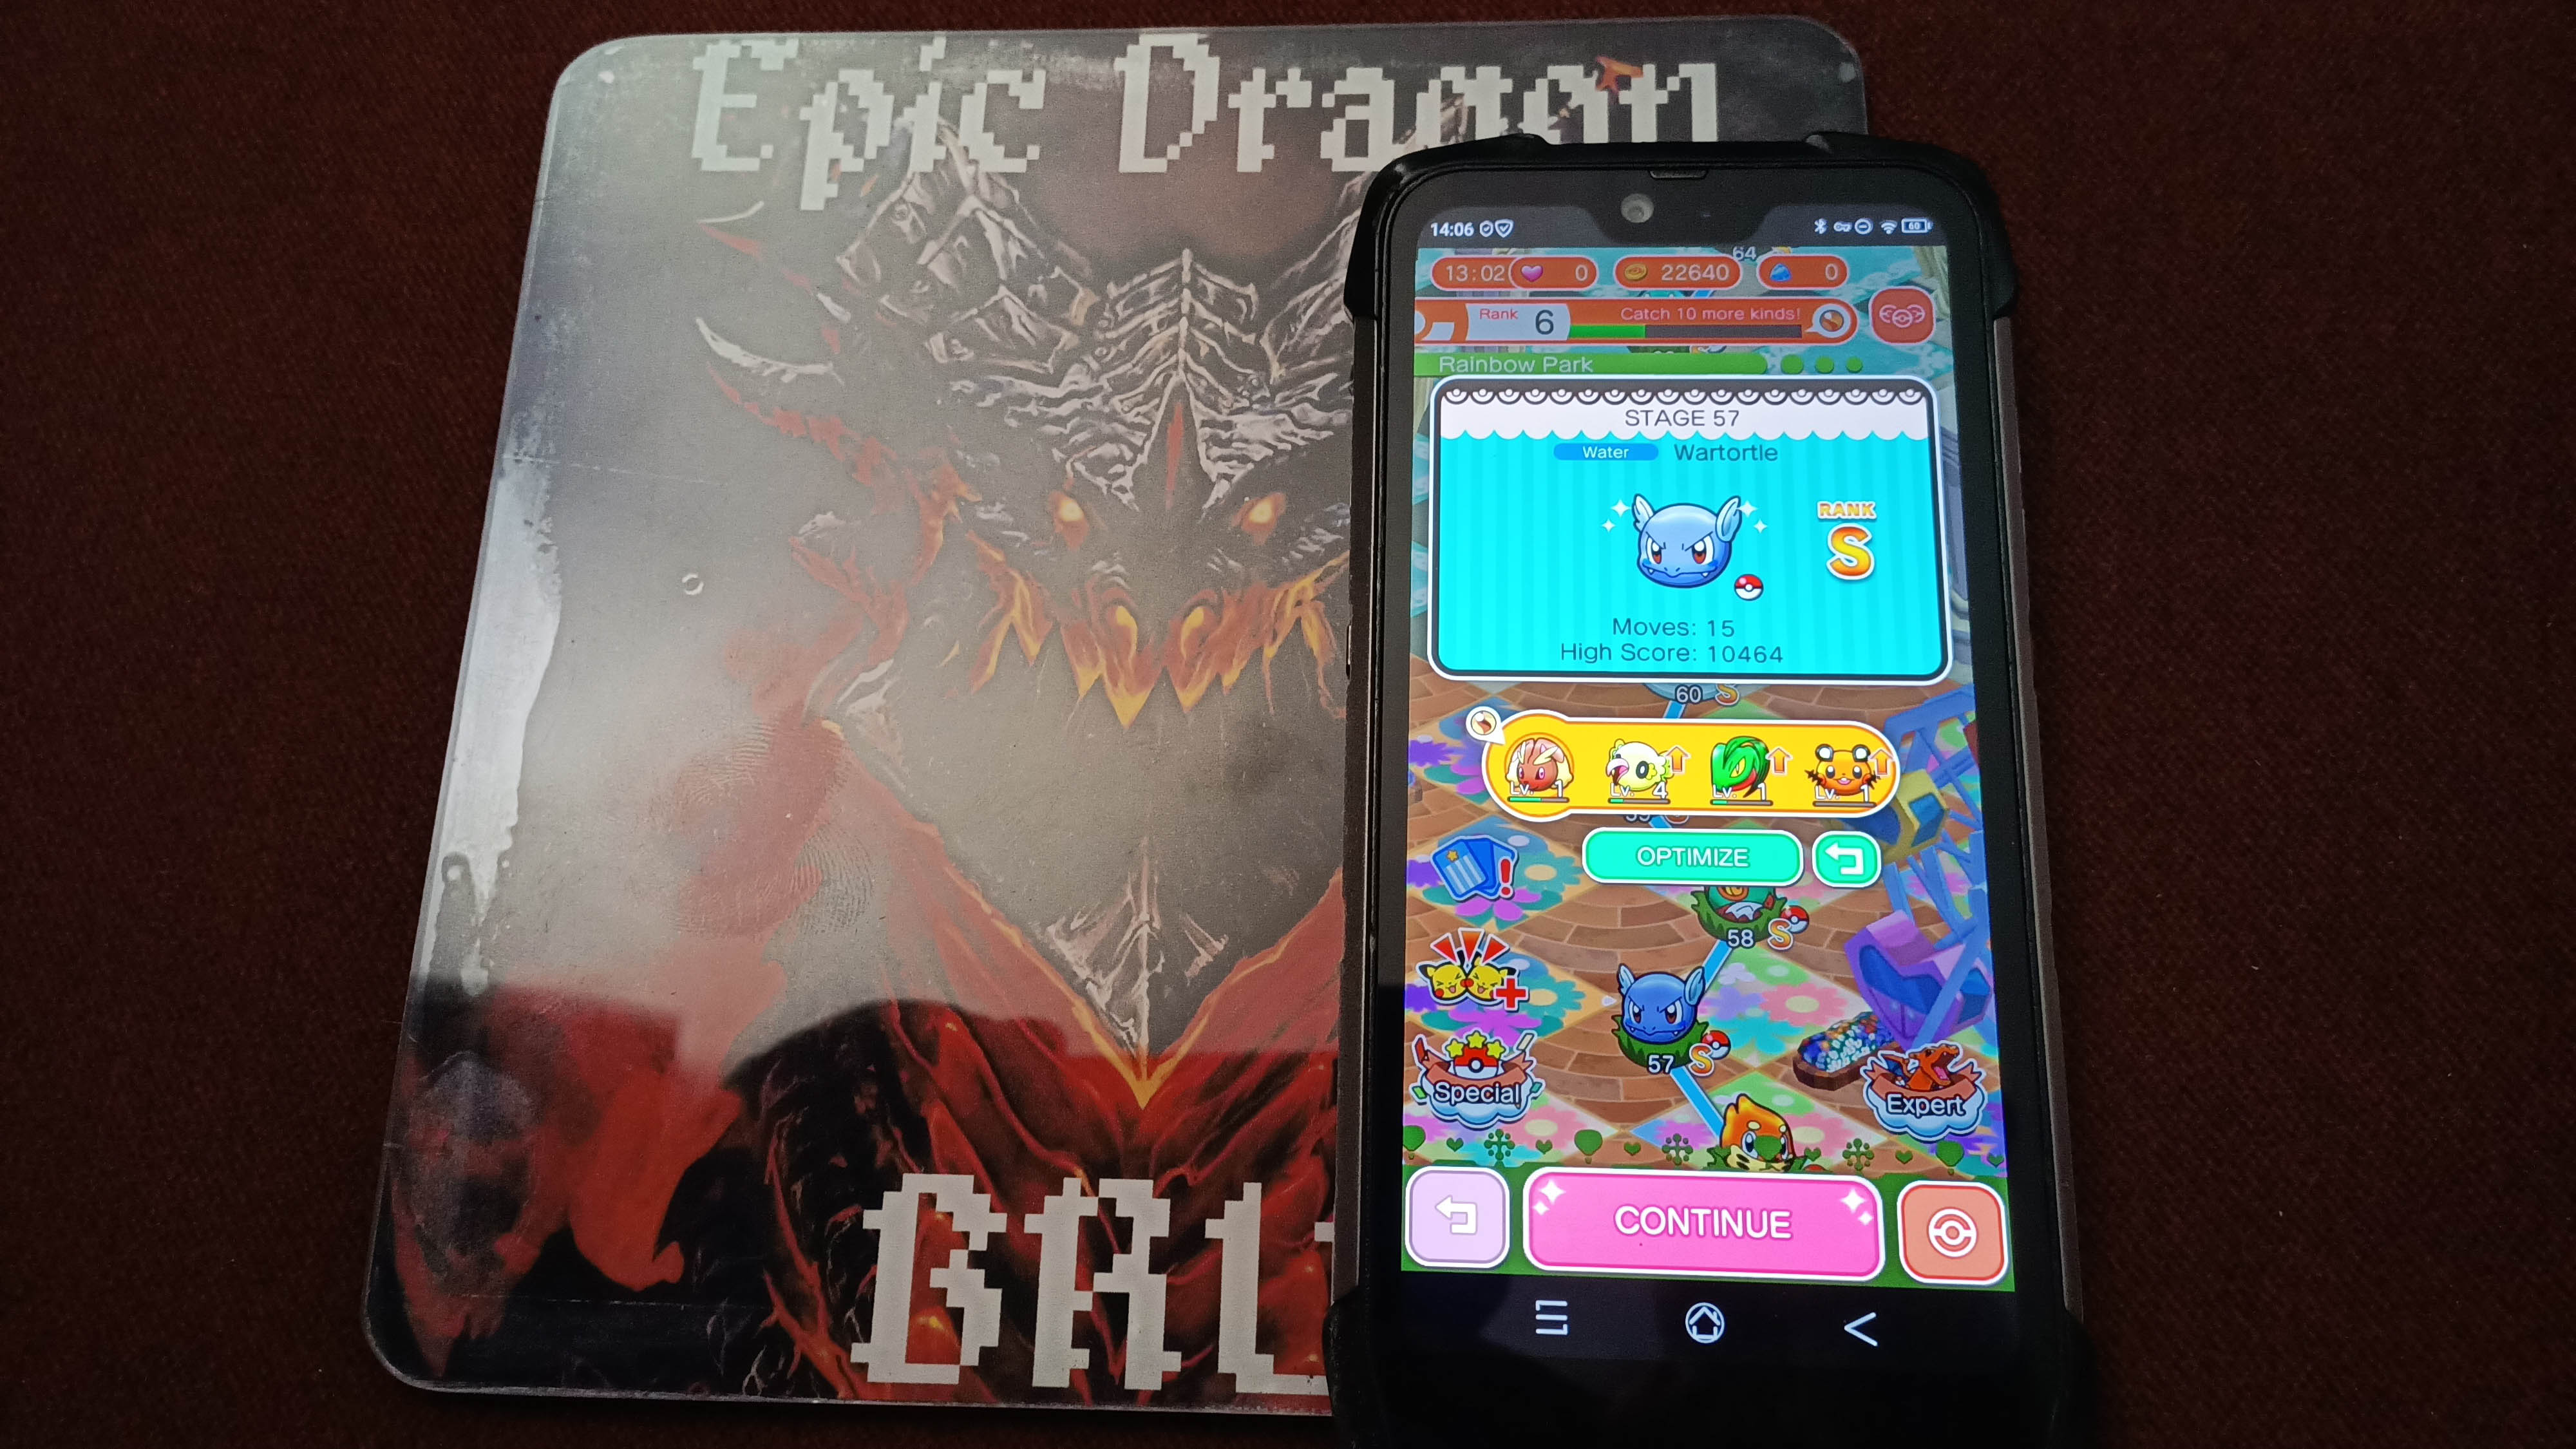 EpicDragon: Pokemon Shuffle Mobile: Stage 057 (Android) 10,464 points on 2022-09-14 16:35:26